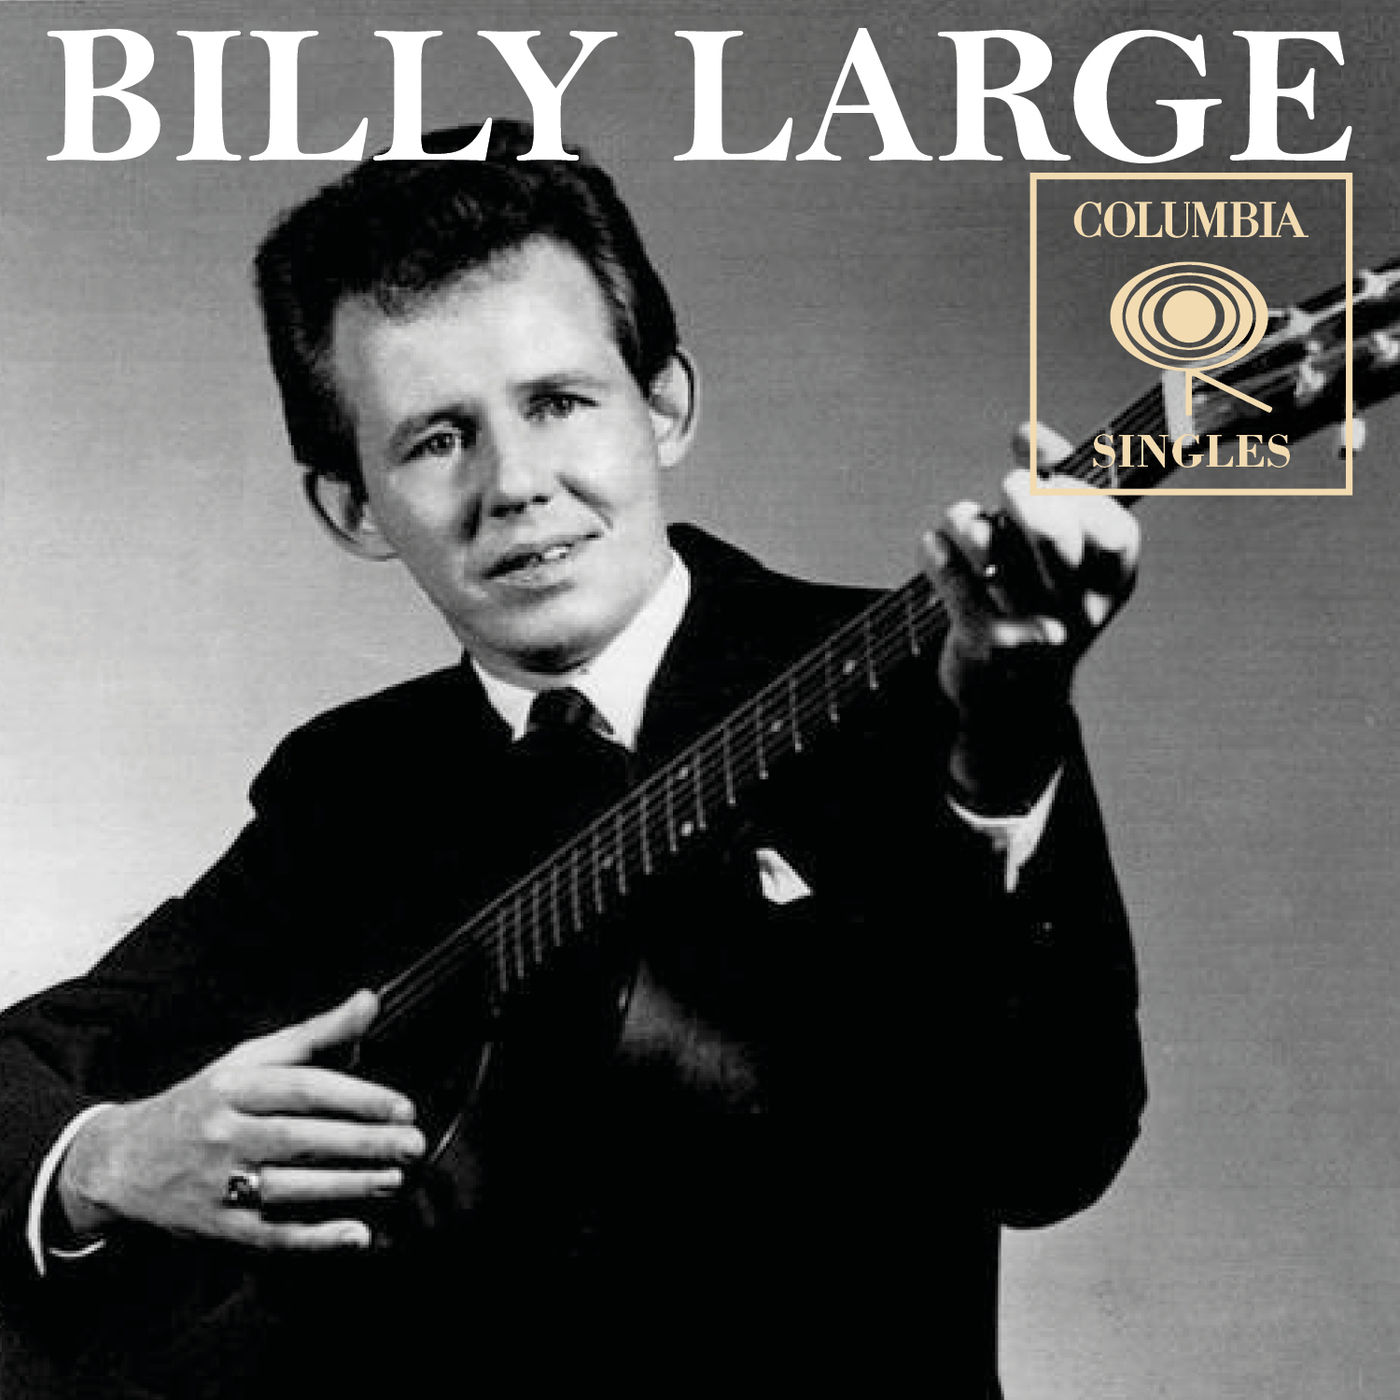 Billy Large – Columbia Singles